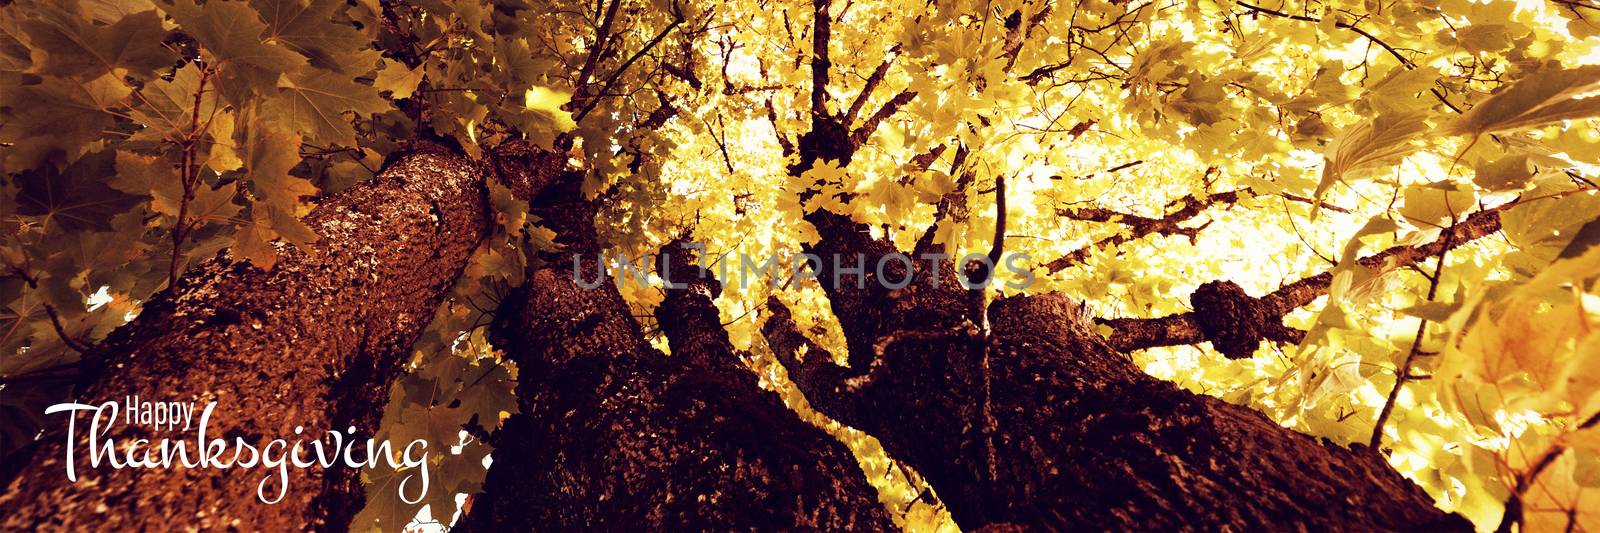 Illustration of happy thanksgiving day text greeting against  leaves in a branch of tree